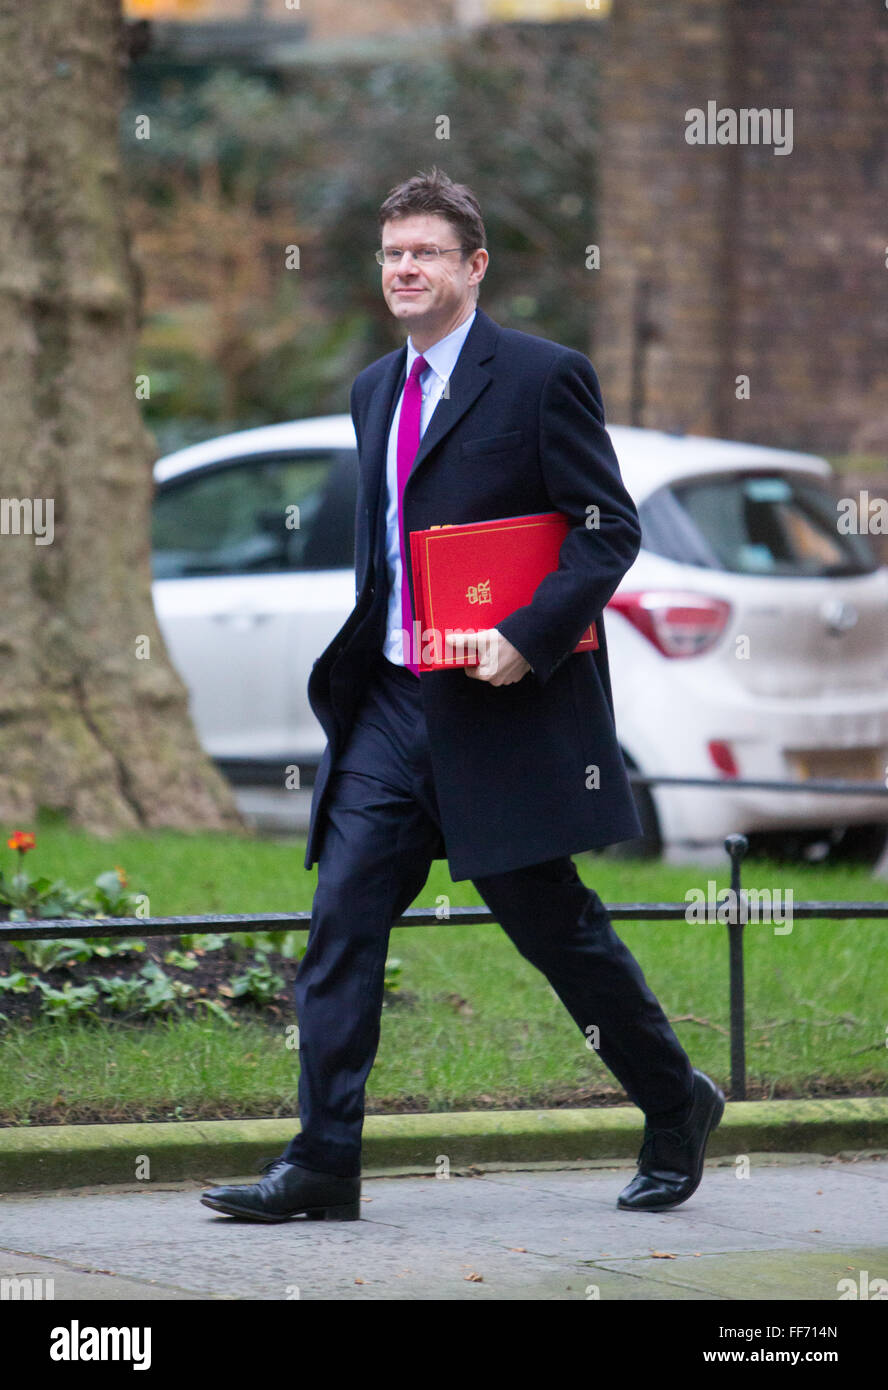 Communities and Local Government Secretary,Greg Clark at 10 Downing street for a cabinet meeting Stock Photo